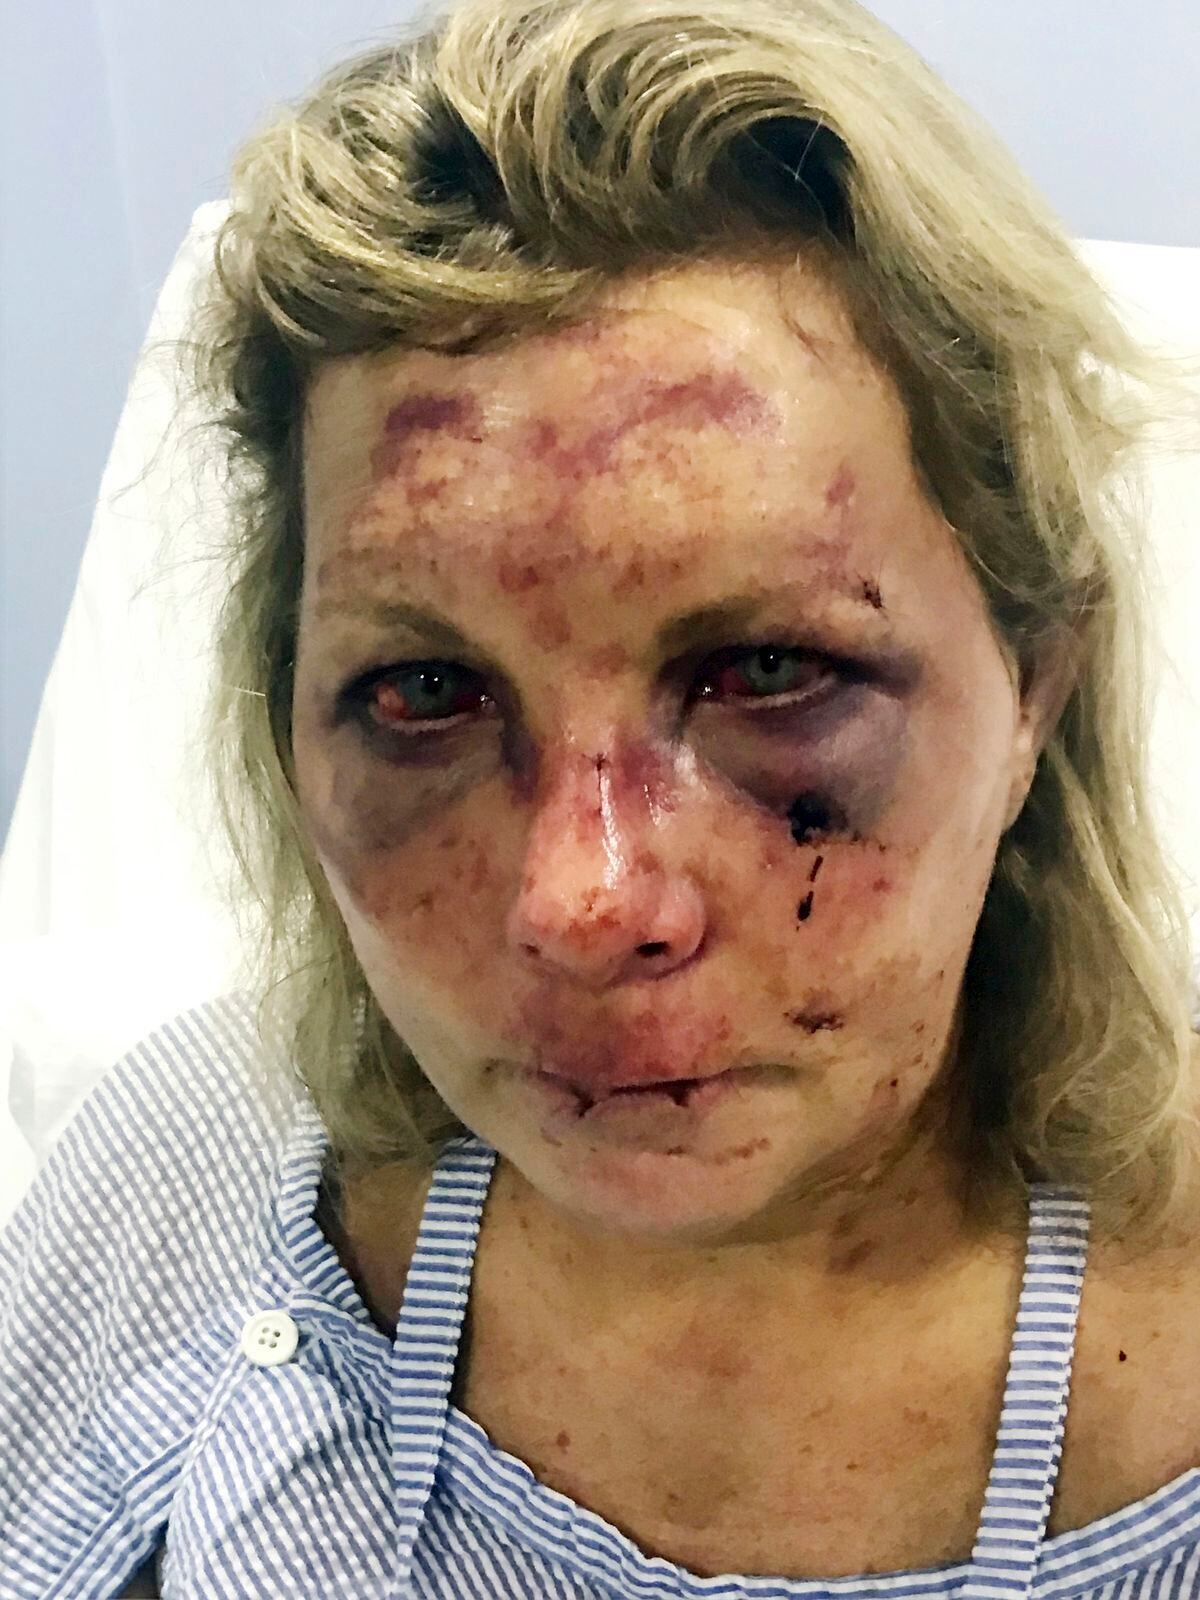 Dominican Police Investigating Attack On Delaware Woman At